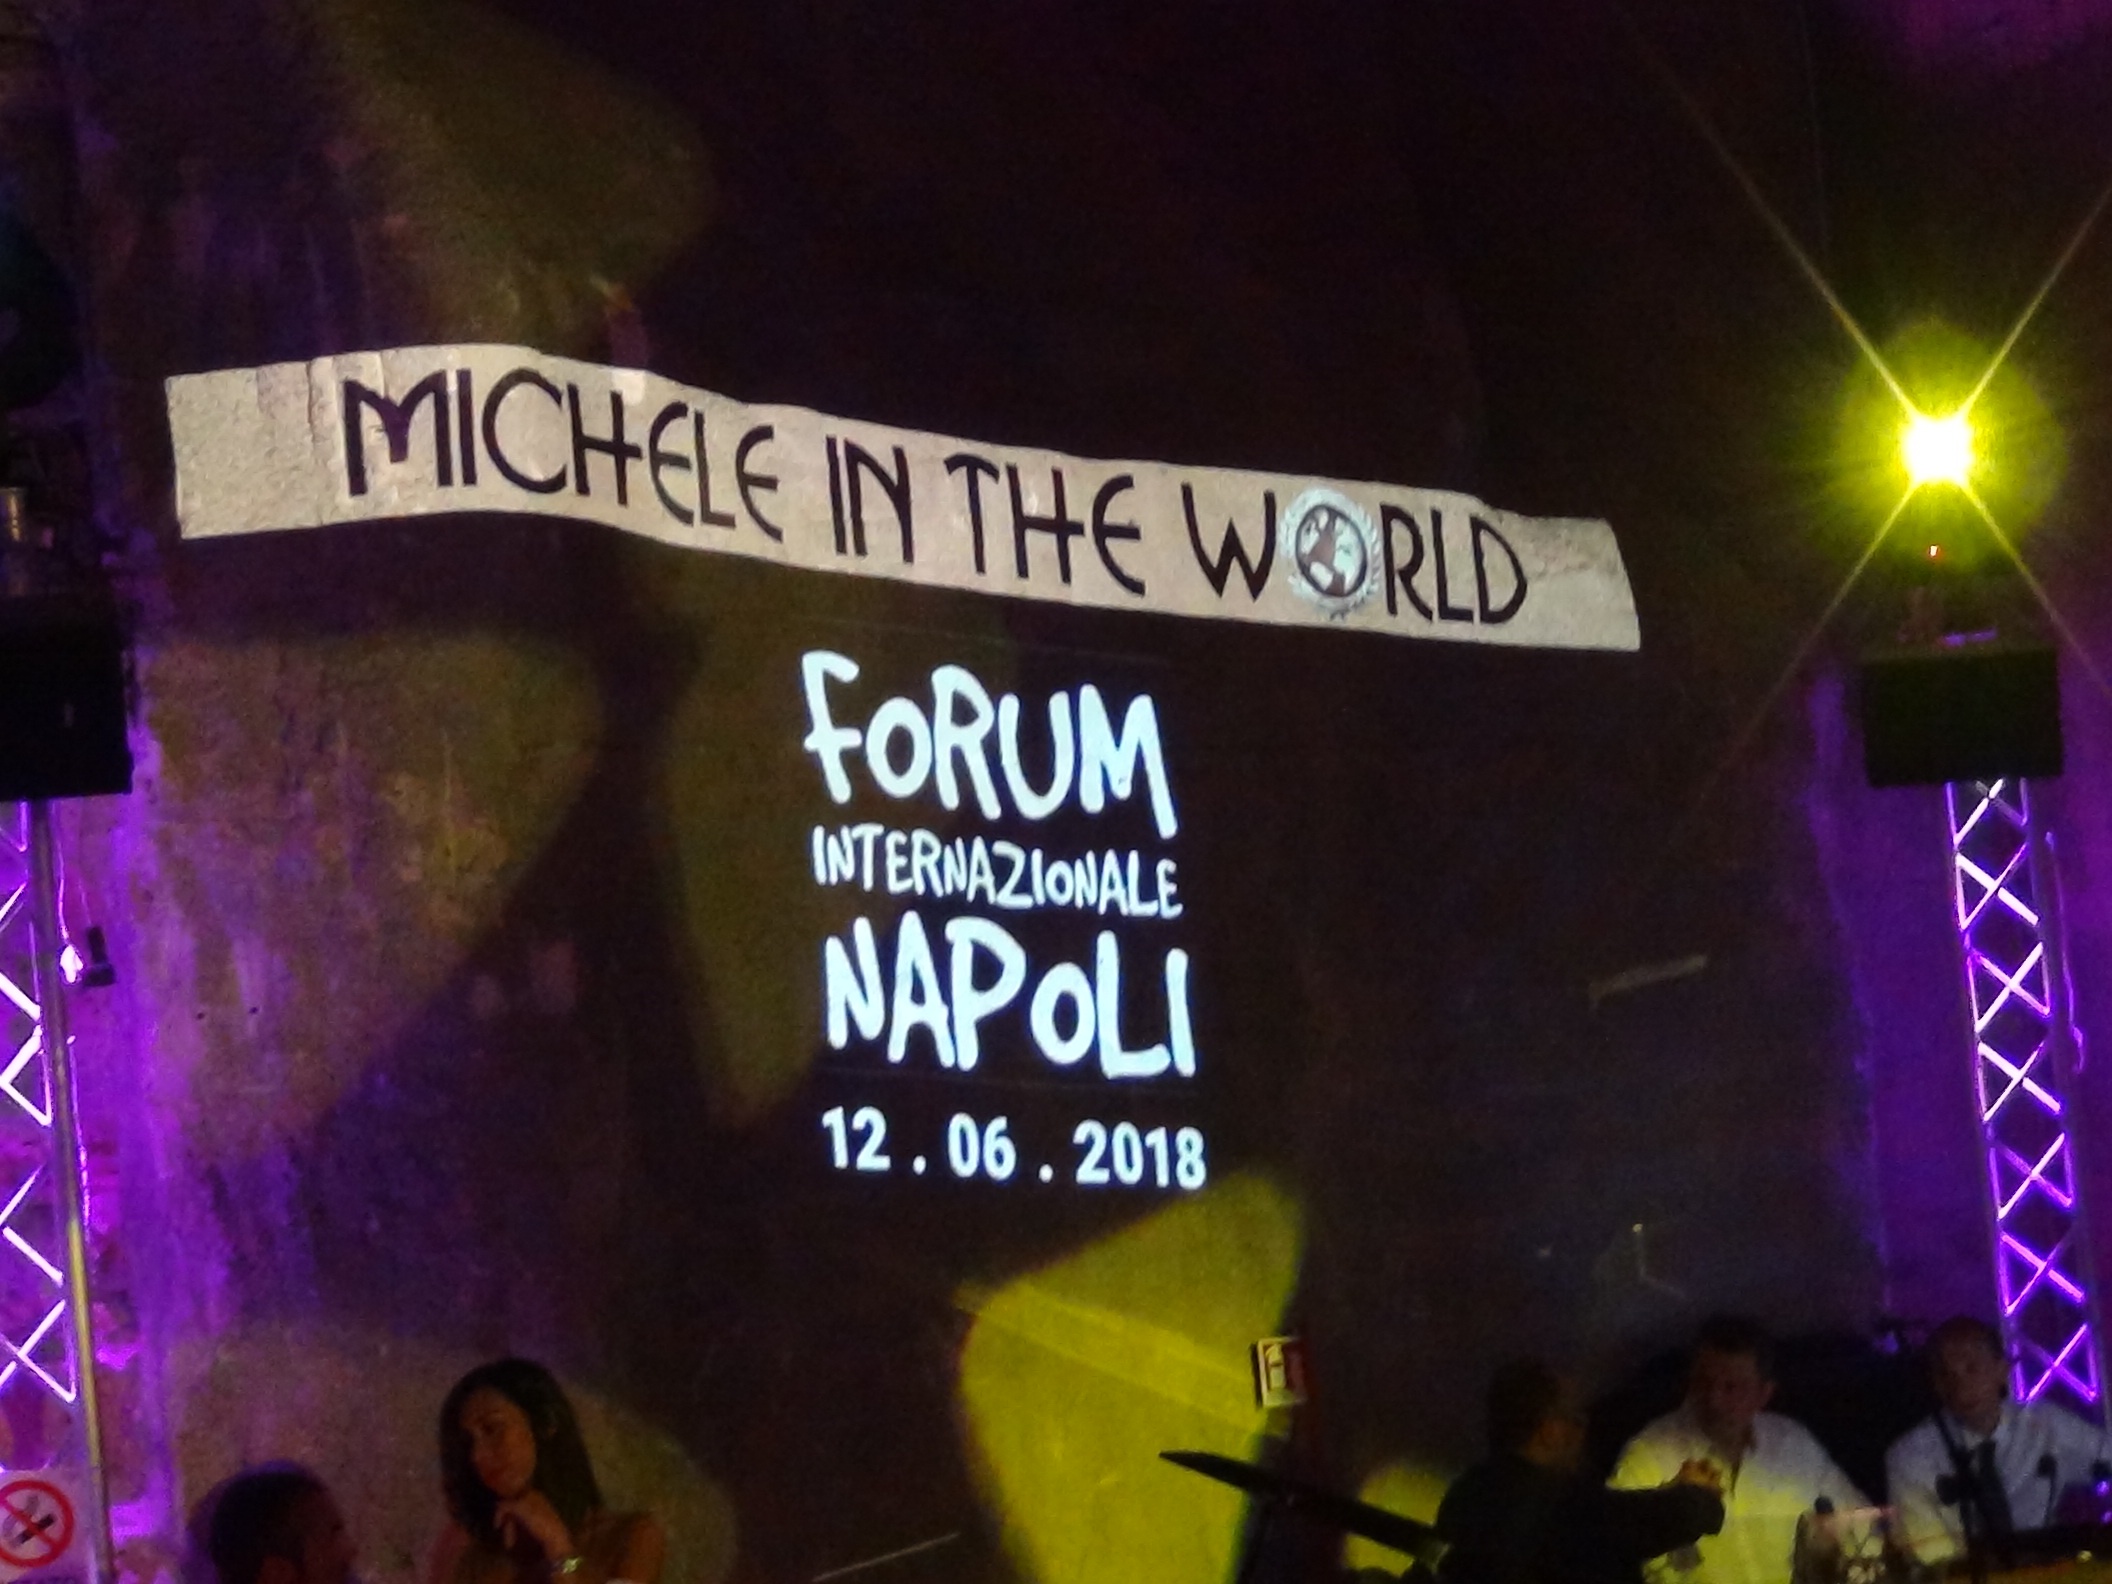 forum_michele_in_the_world